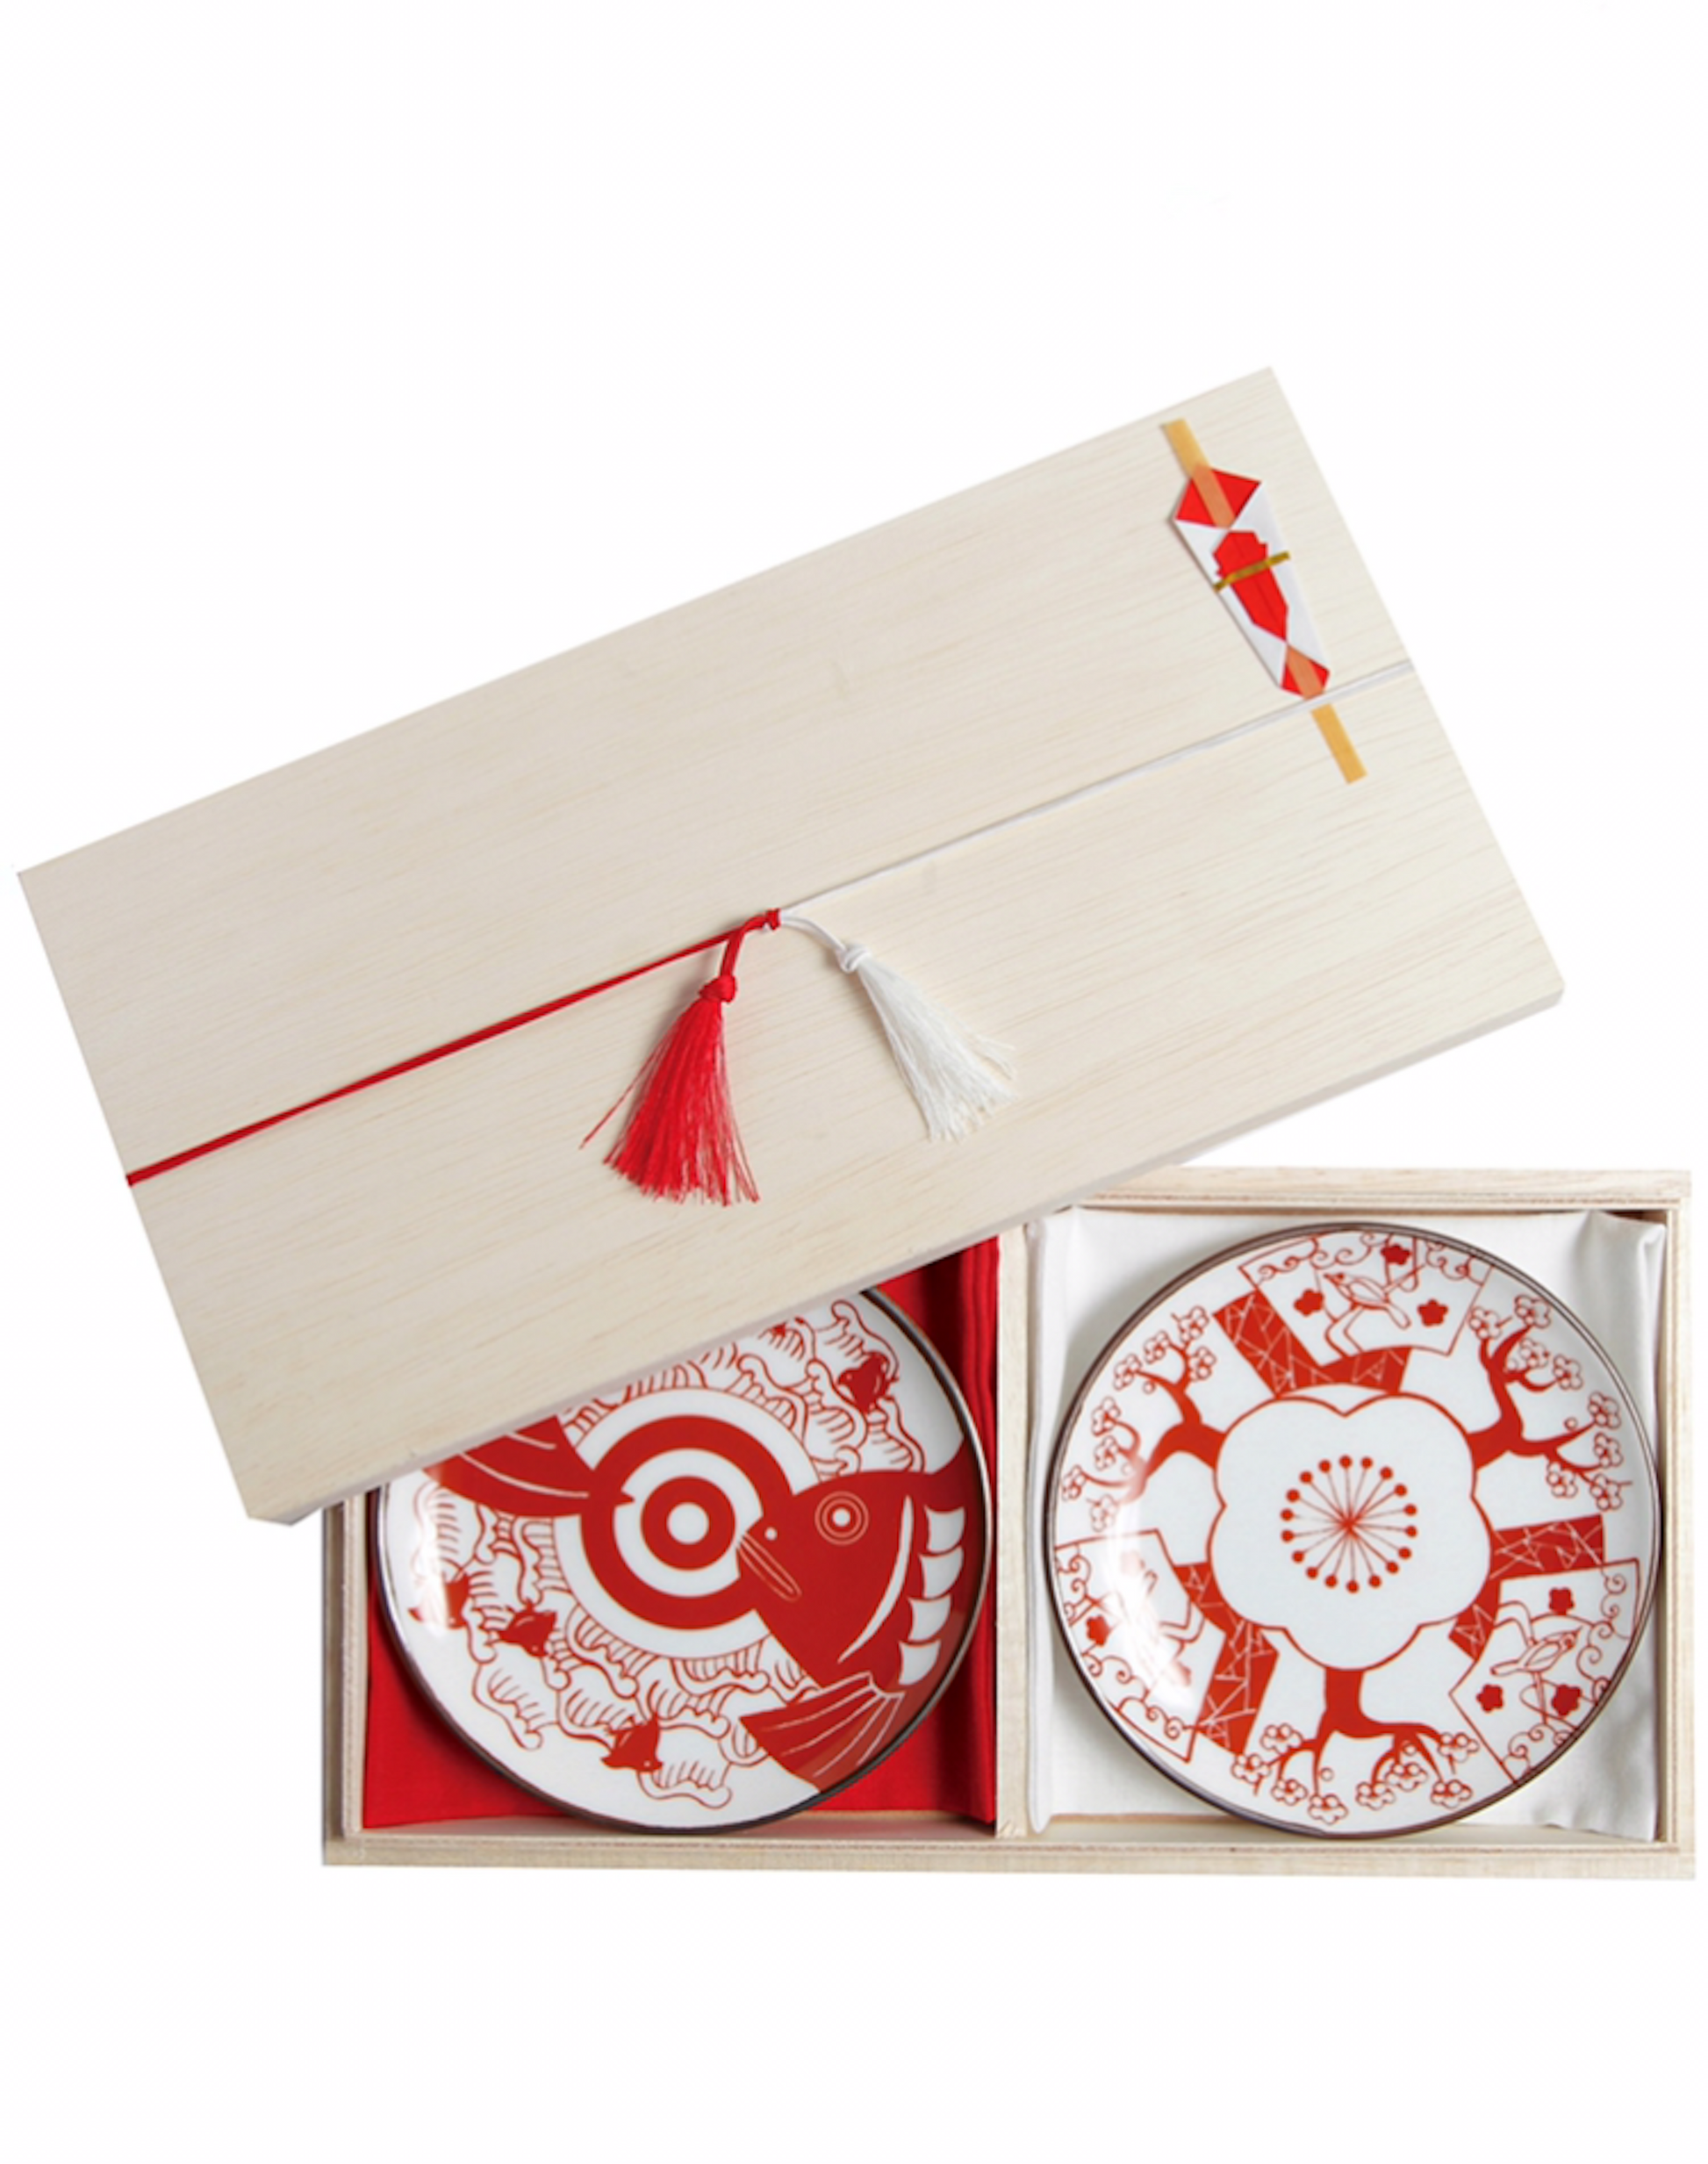 Wooden gift box for two small Kyototo plates